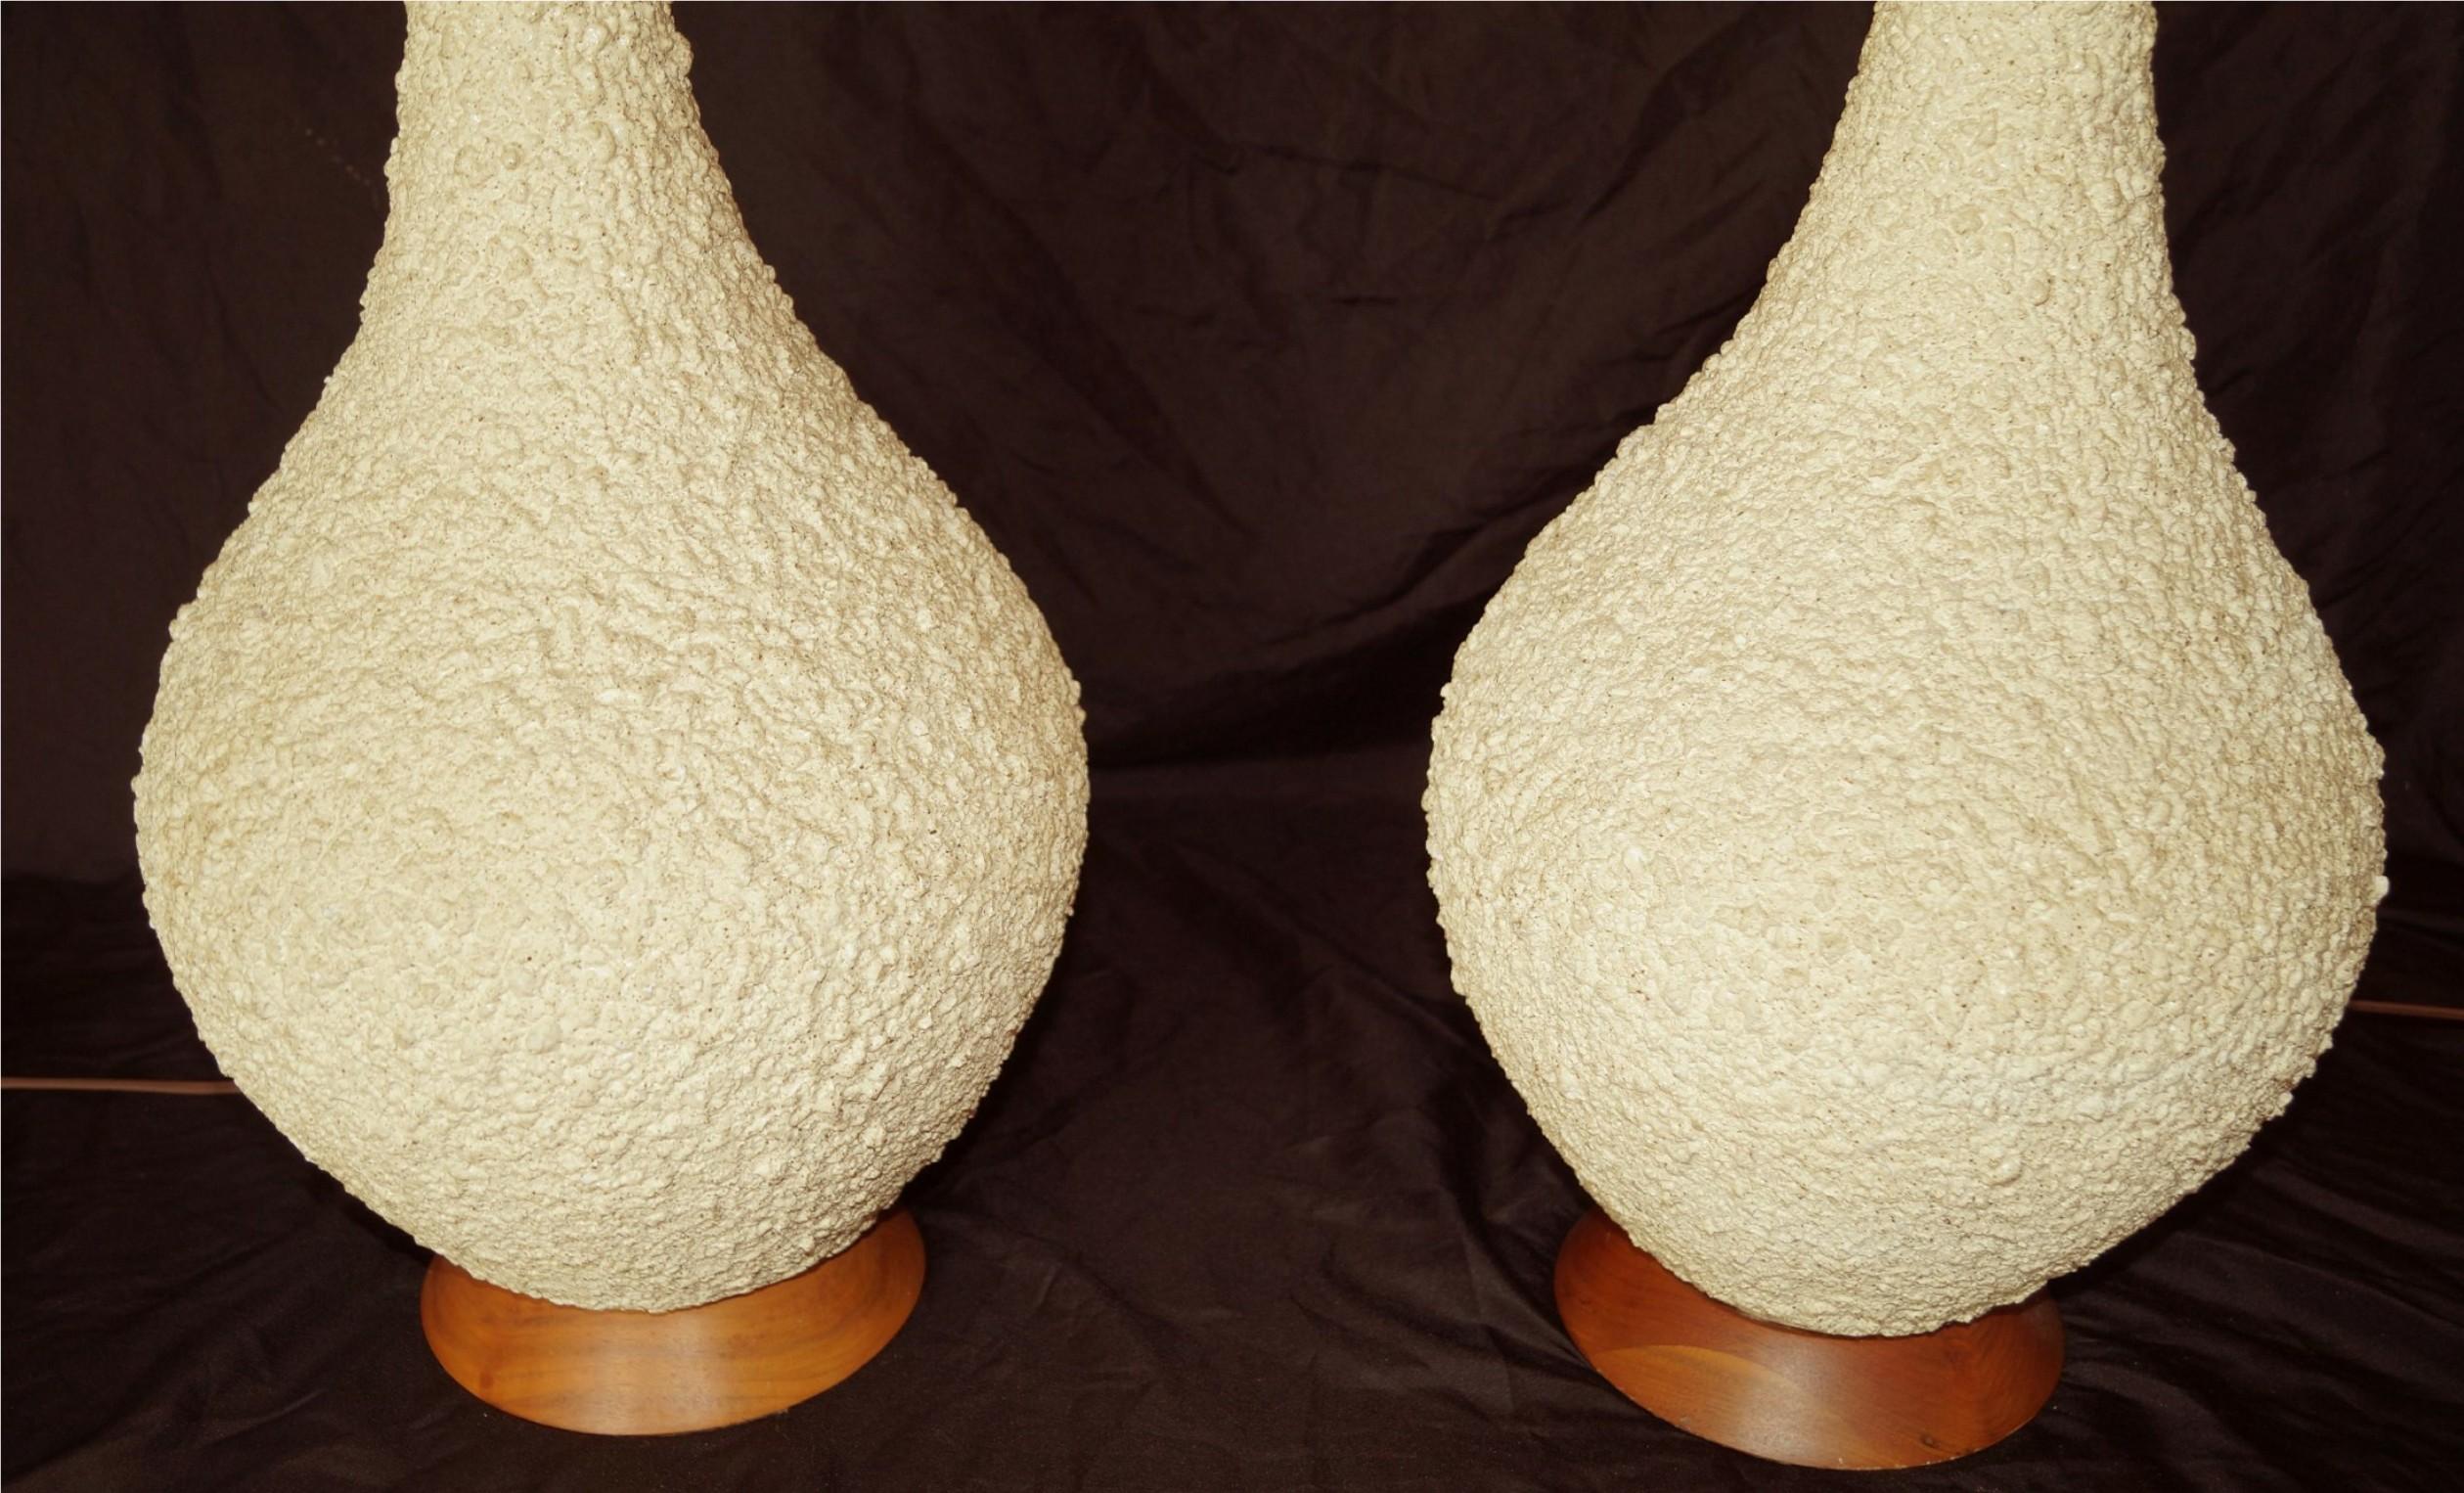 Pair of Mid-Century Modern Large Popcorn Teak Table Lamps In Good Condition For Sale In Wayne, NJ